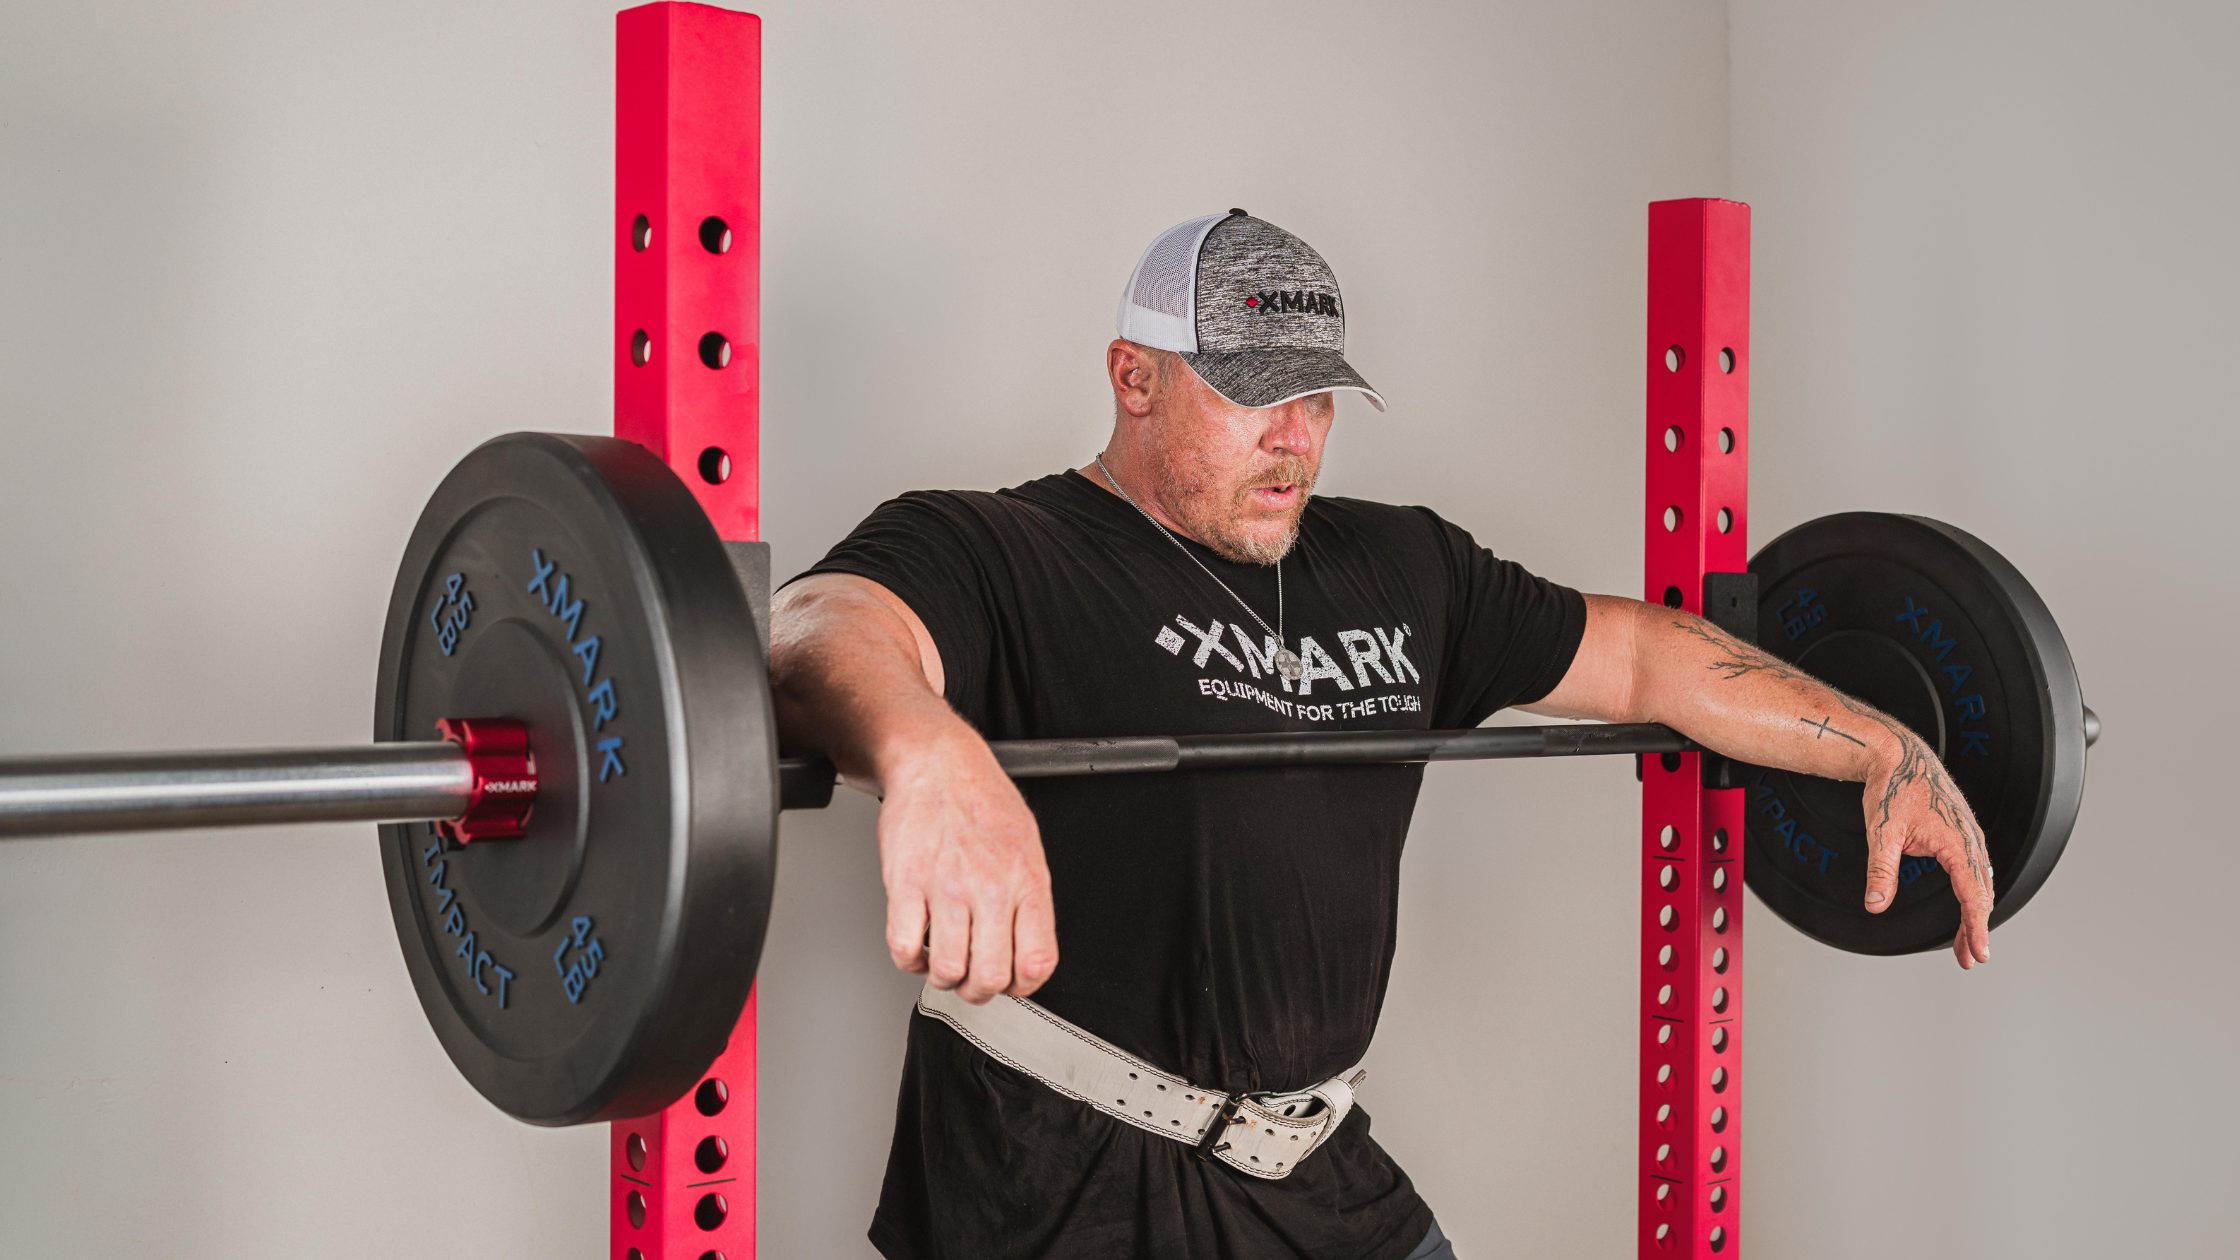 Man leaning on racked barbell